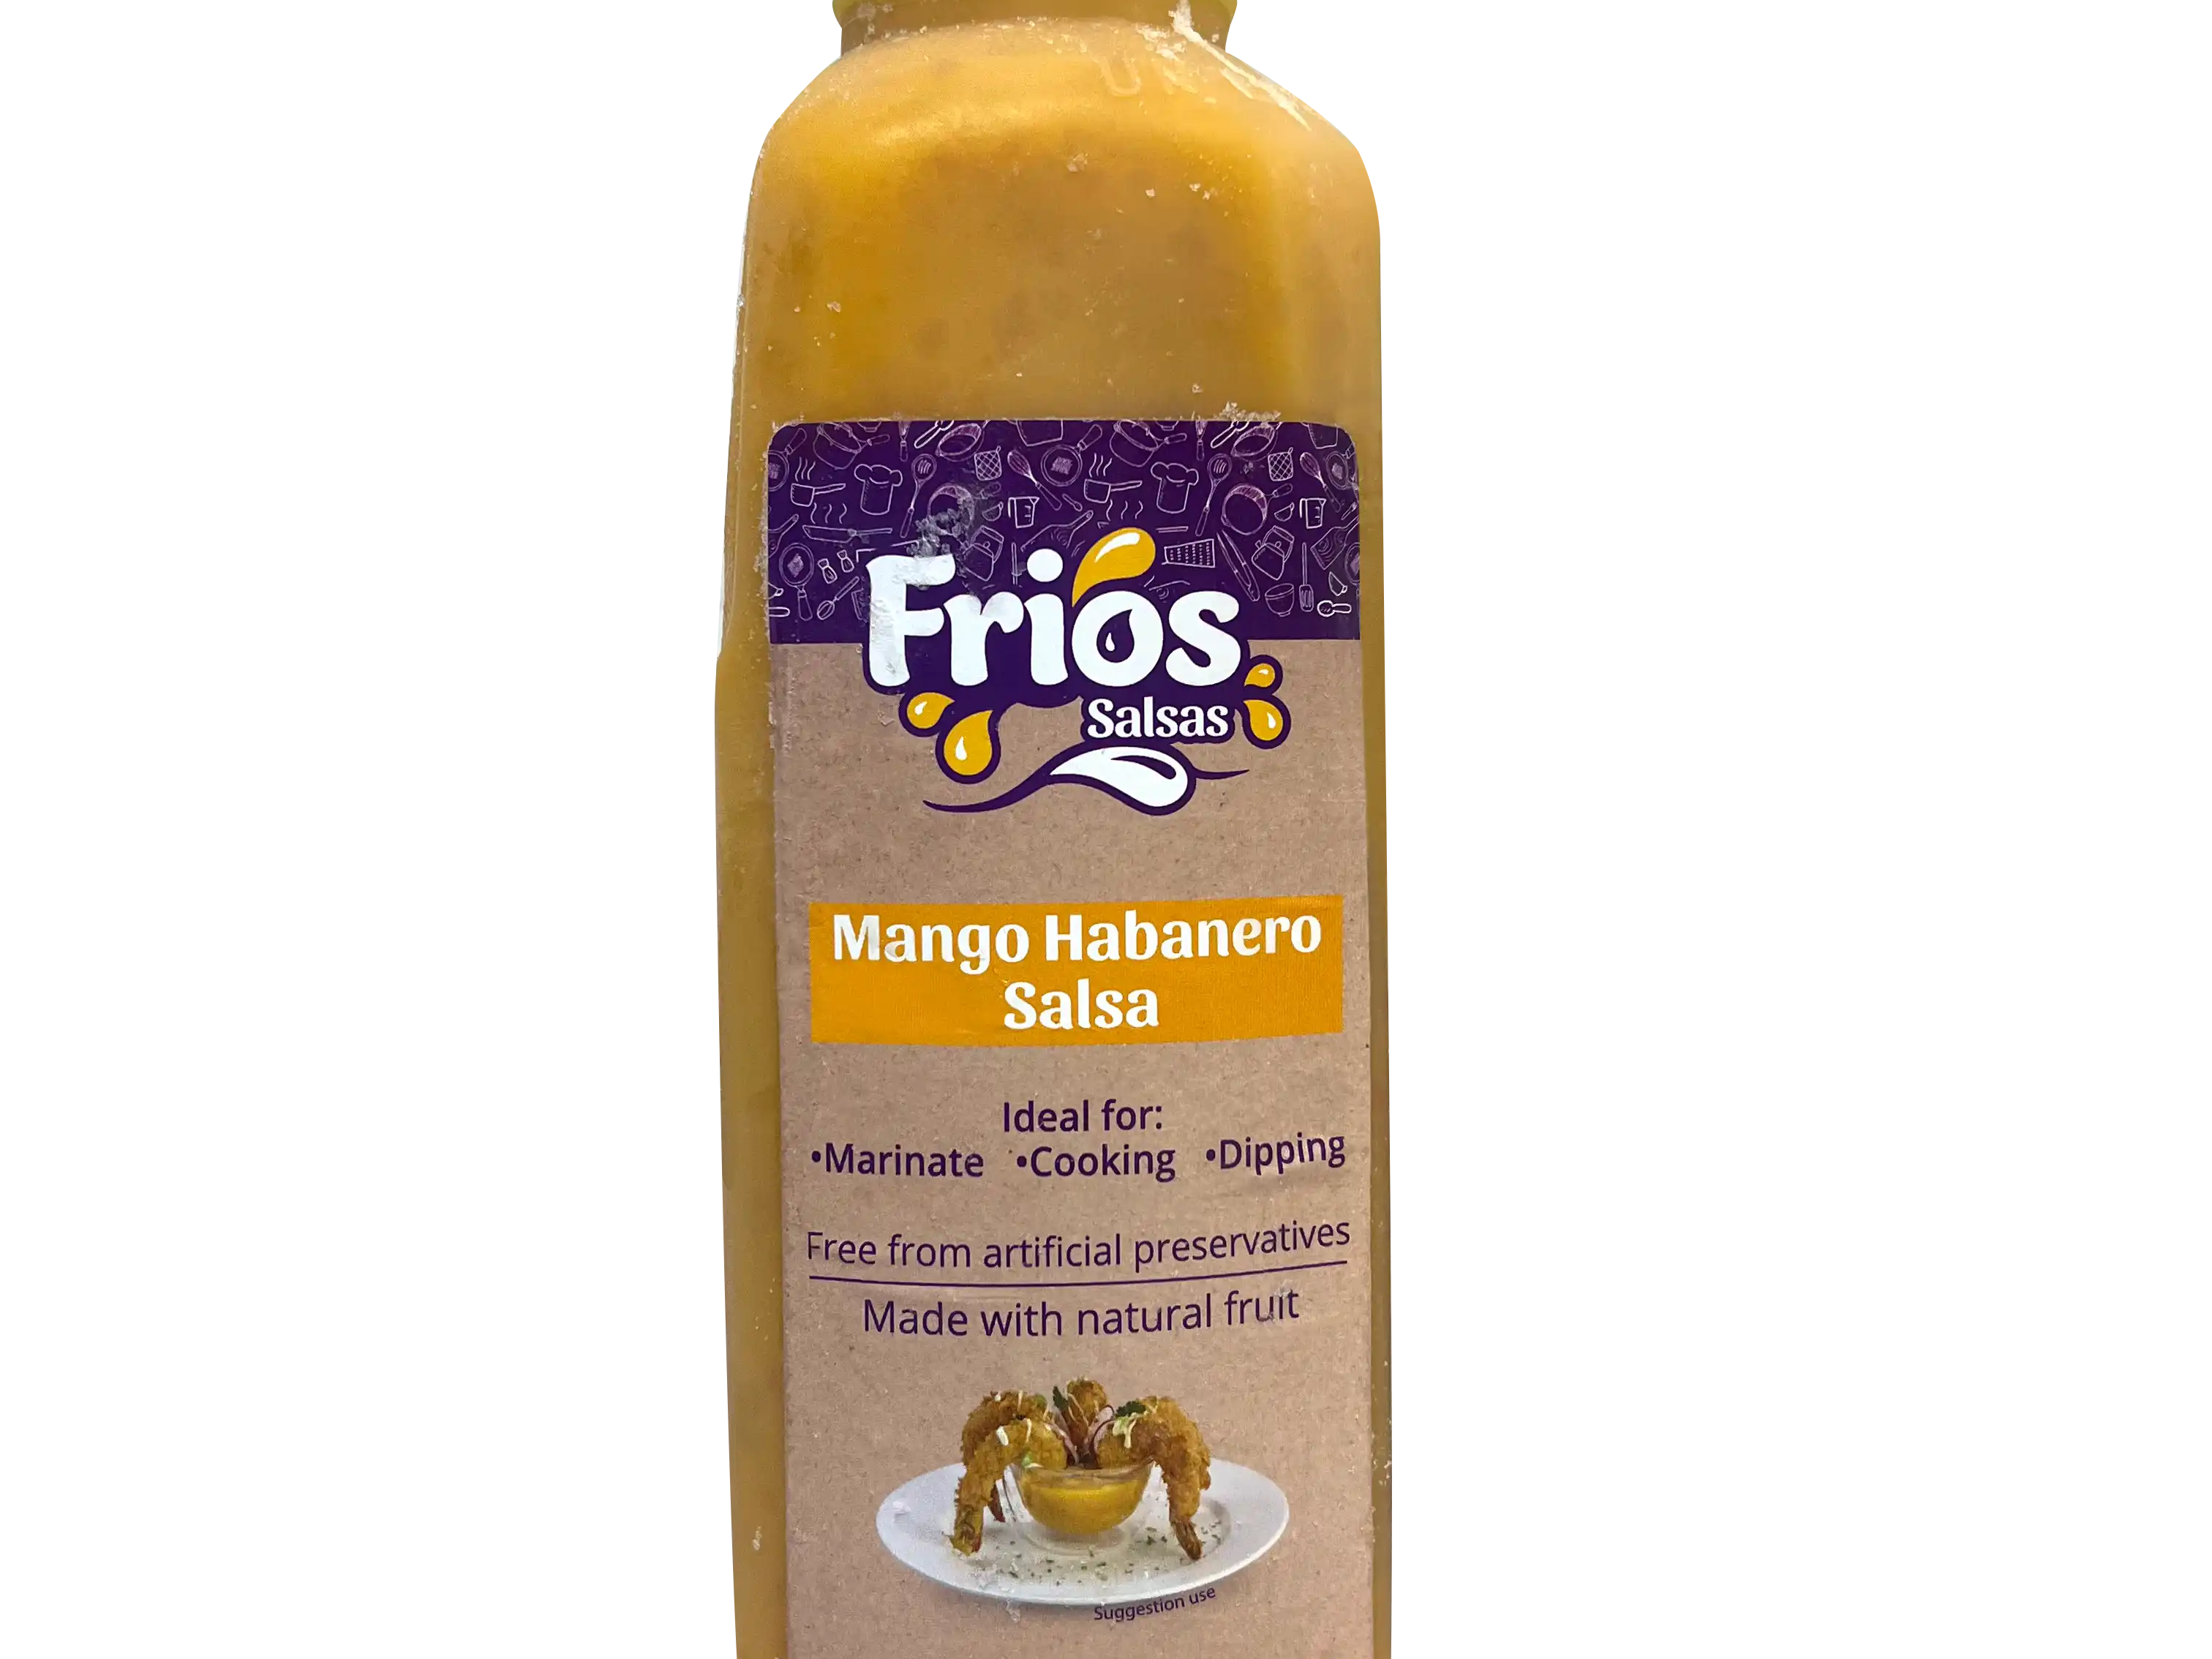 Buy Mango Habanero Salsa - Spice Up Your Meals with Friendly Fruits' Gourmet Delight